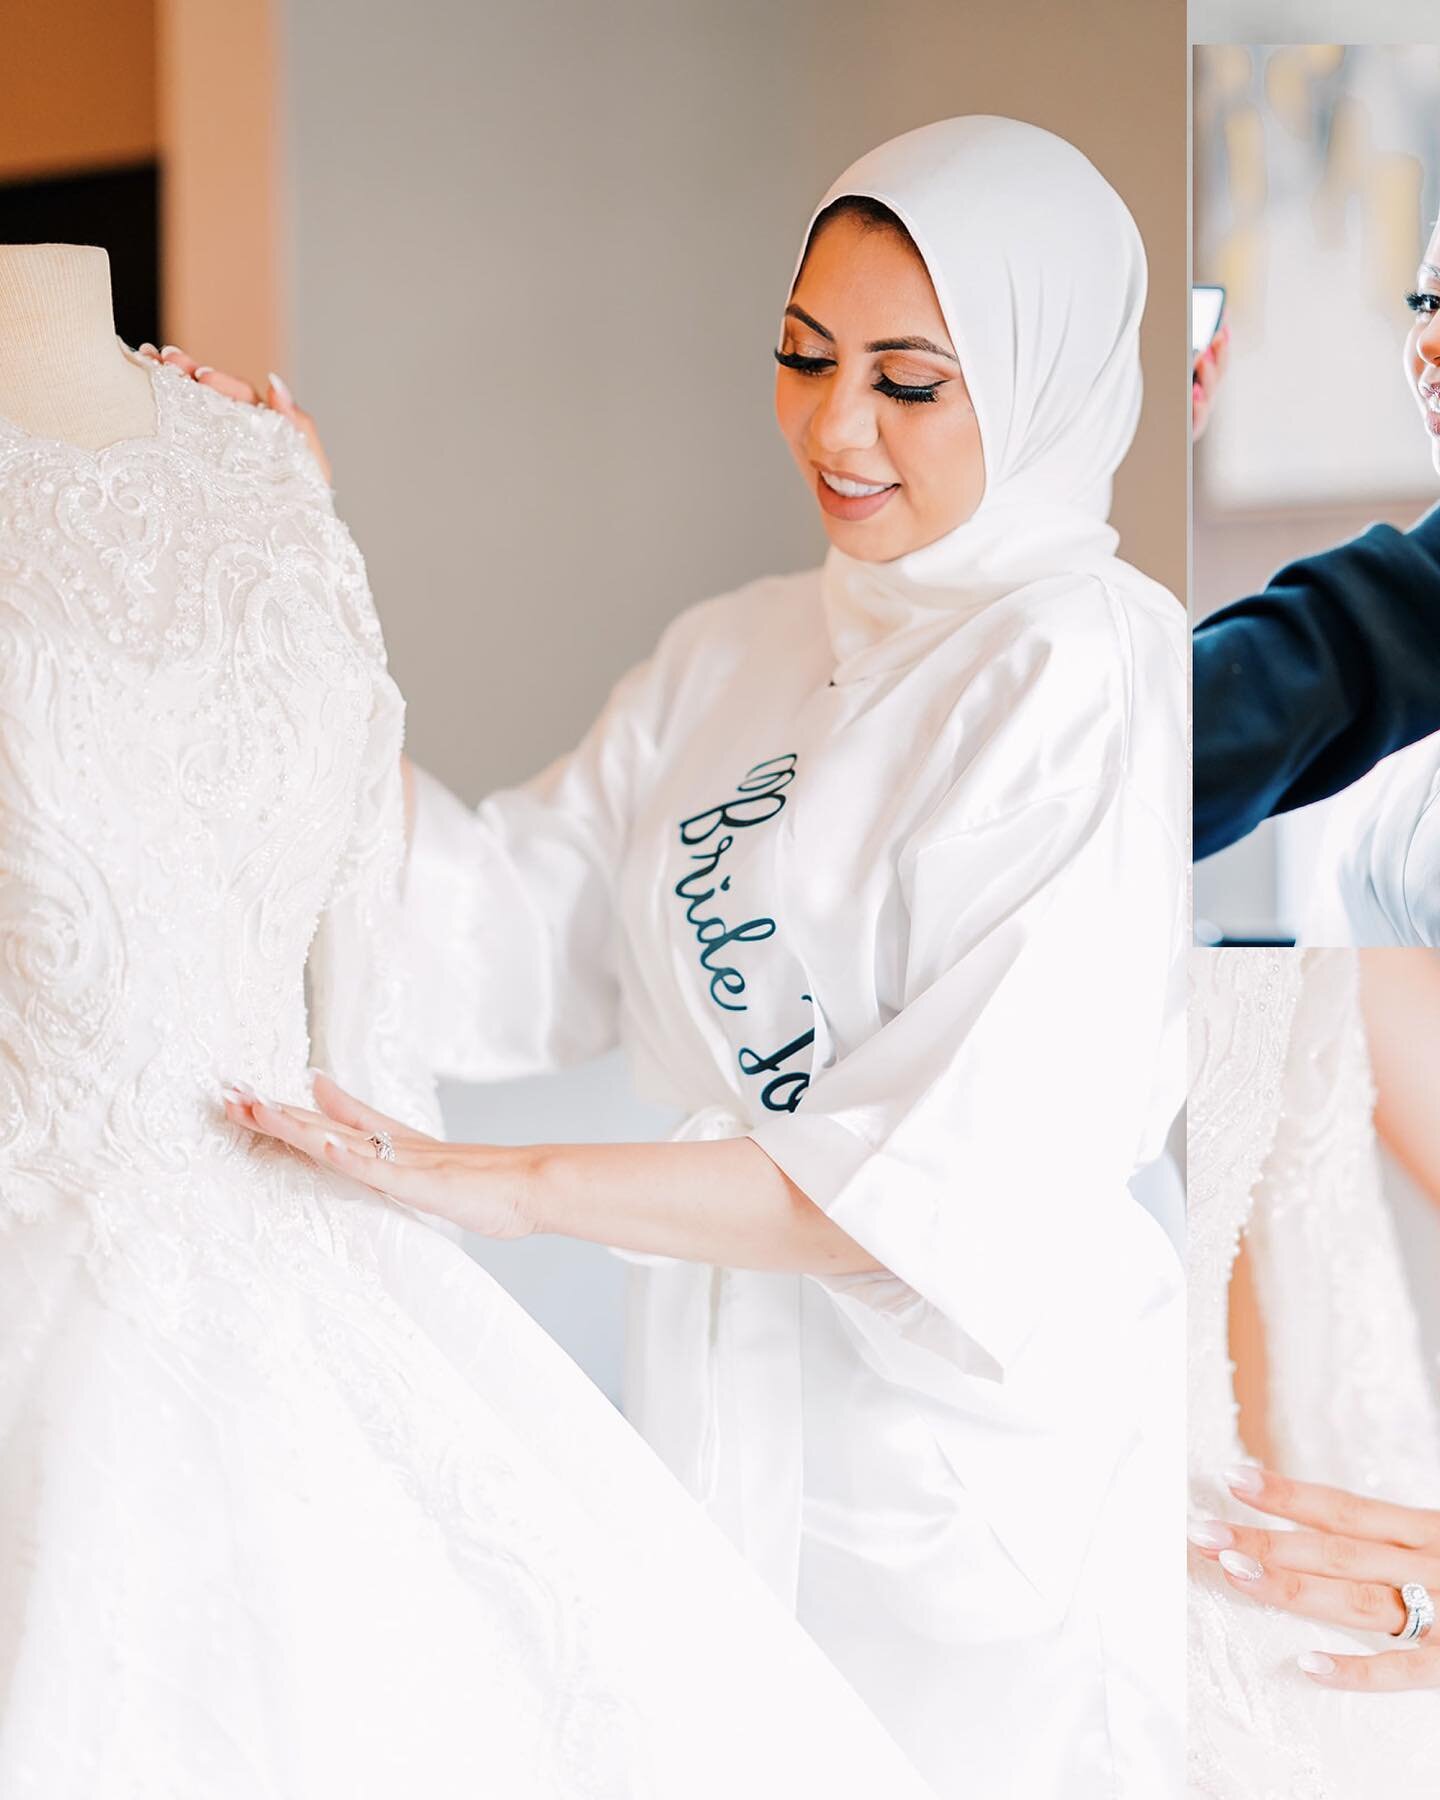 Getting ready photos are one of my top three moments I love capturing in the wedding. 
Swop to see all the details 

Decor: @maysevents 
Makeup: @beautybykenaaa 
Venue: @watersidenj 
Dress: Egypt